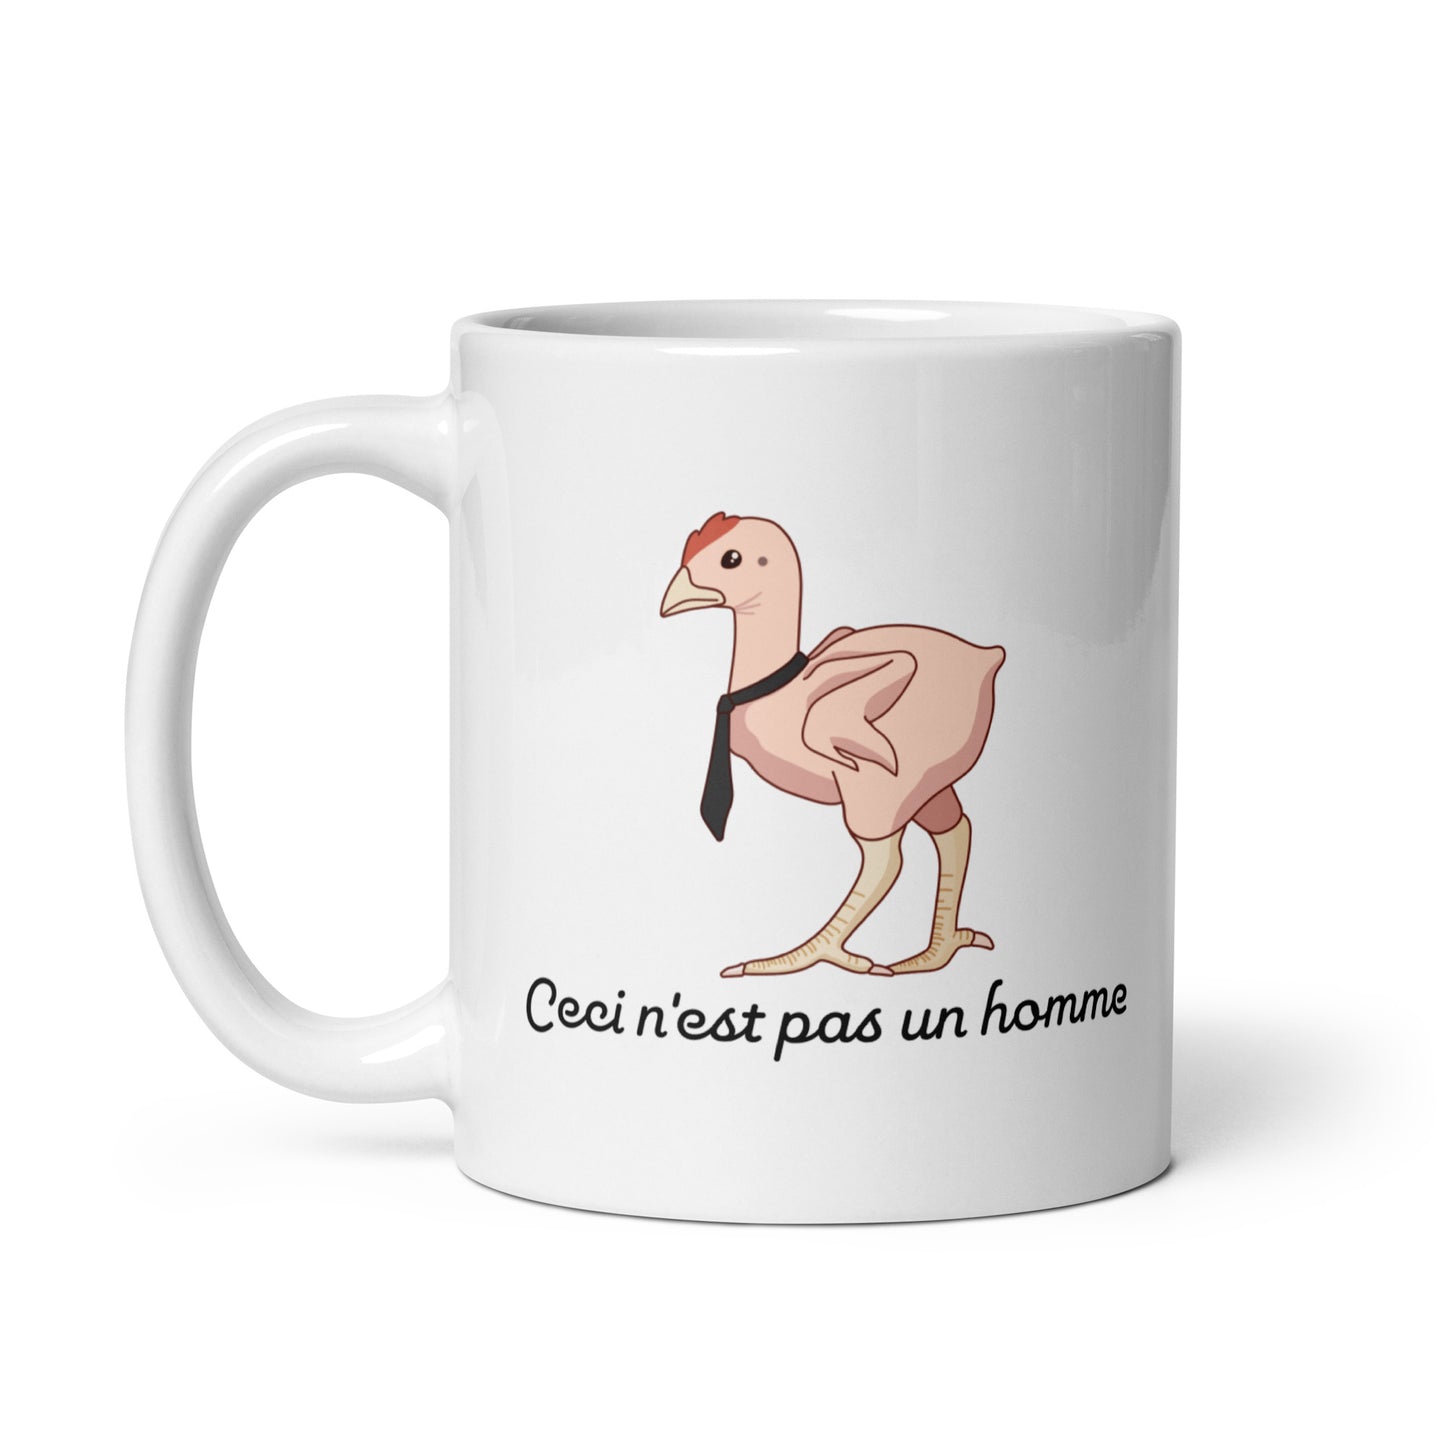 An 11 ounce ceramic mug featuring an illustration of a featherless chicken wearing a tie. Text underneath the chicken reads "Ceci n'est pas un homme" in a cursive font.